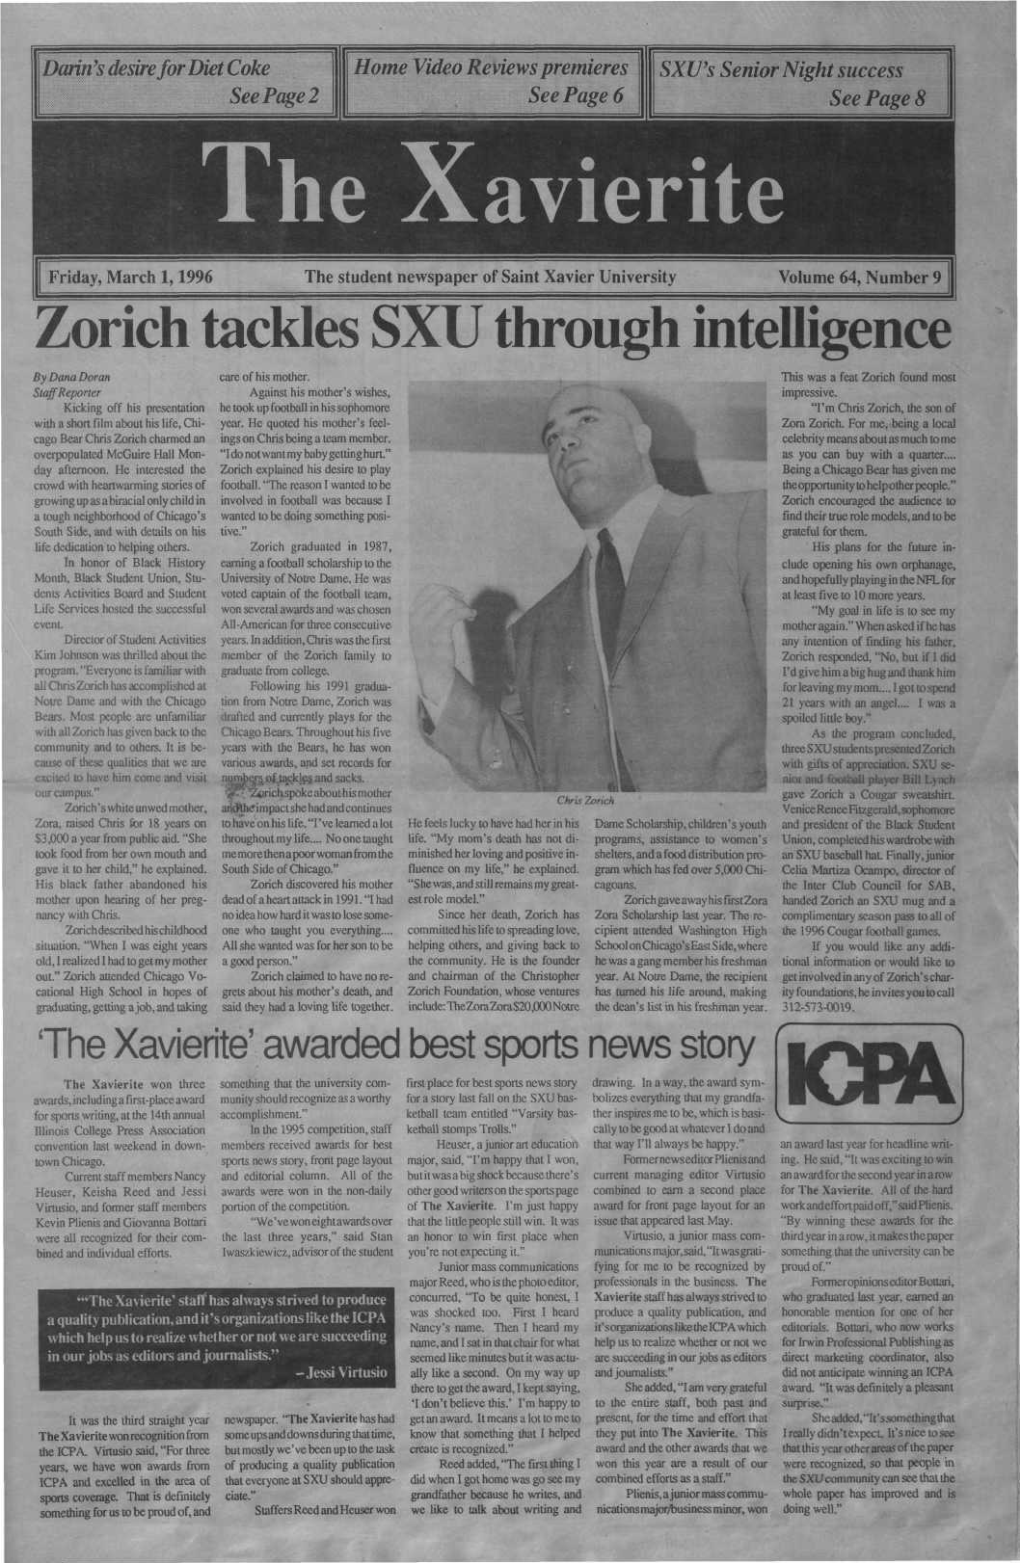 Zorich Tackles SXU Through Intelligence by Dana Dor an Care of His Mother